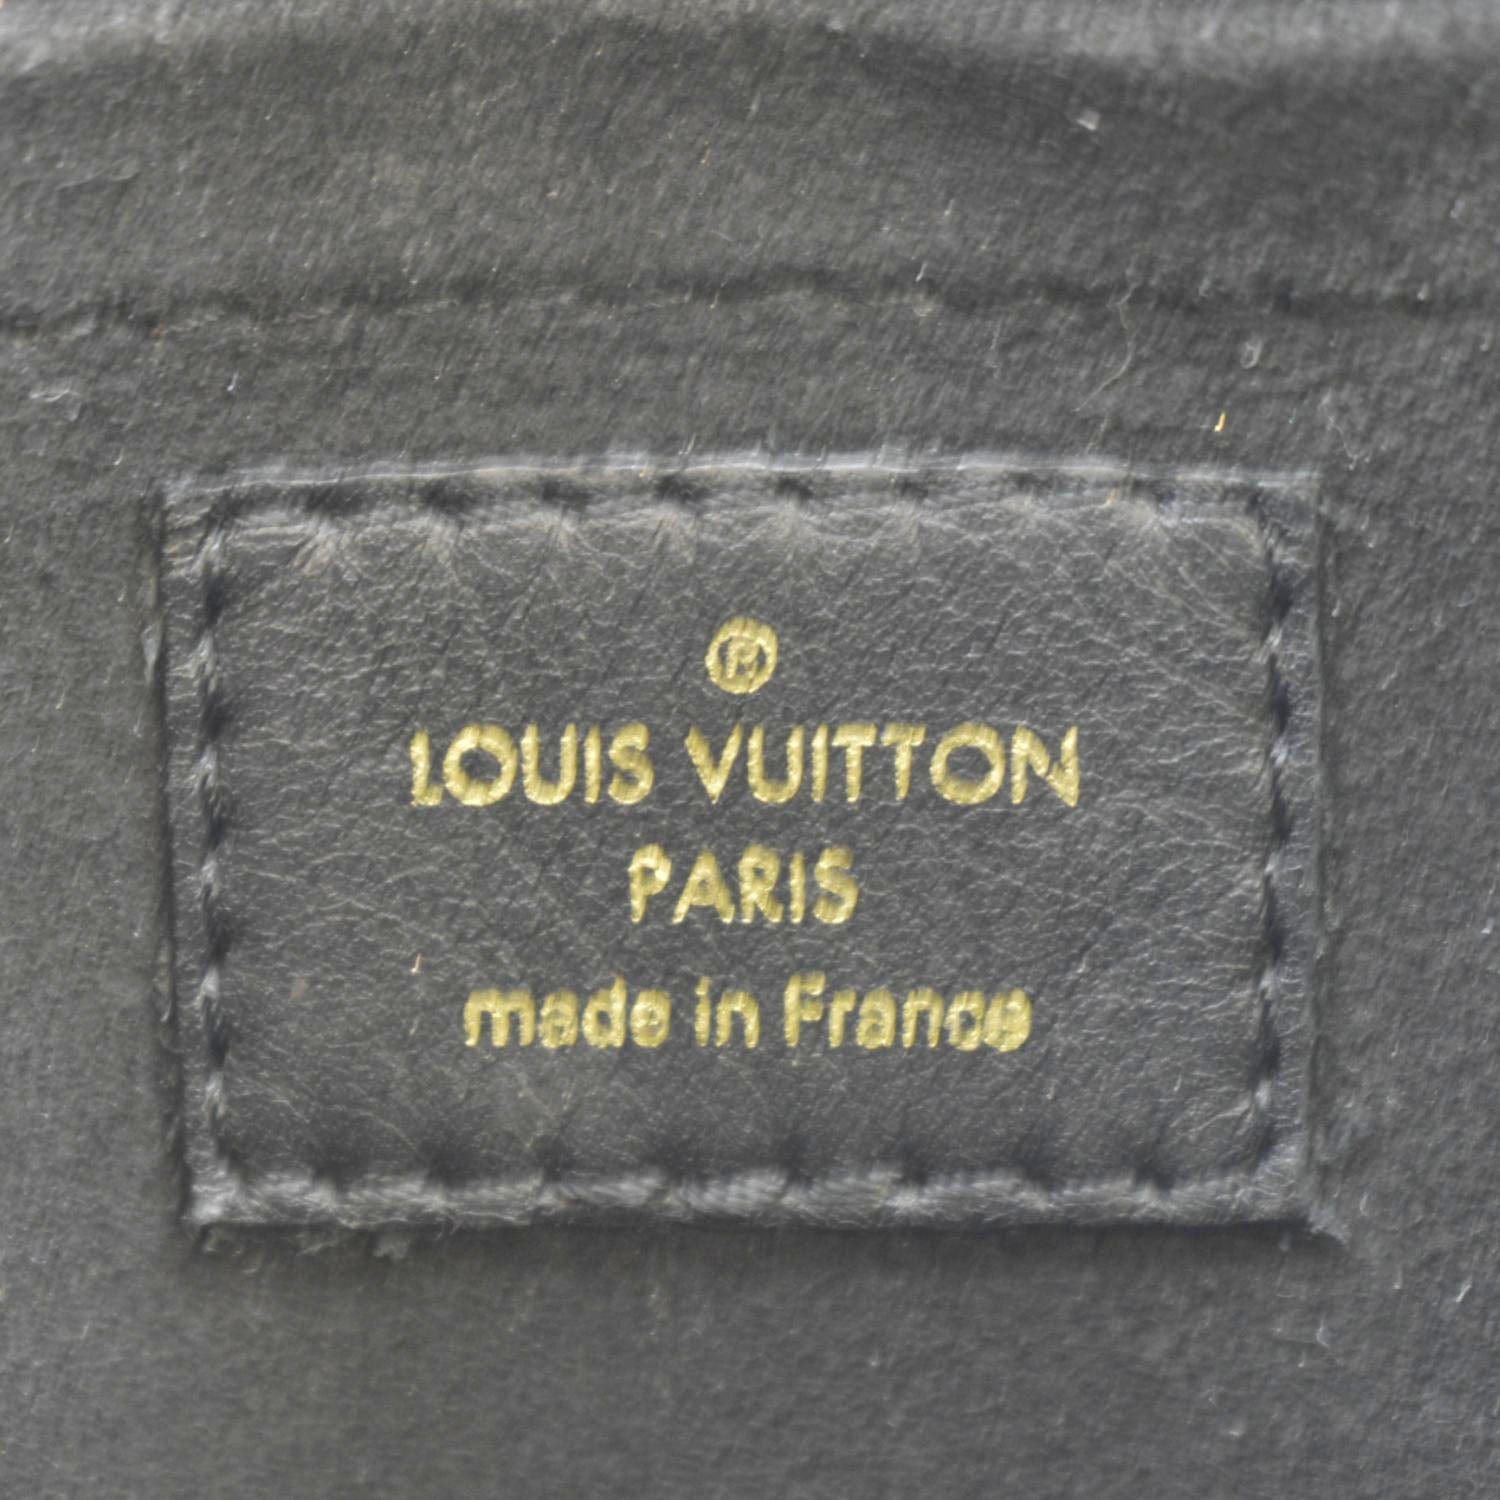 Louis Vuitton New Wave Camera Bag Quilted Leather, 58% OFF